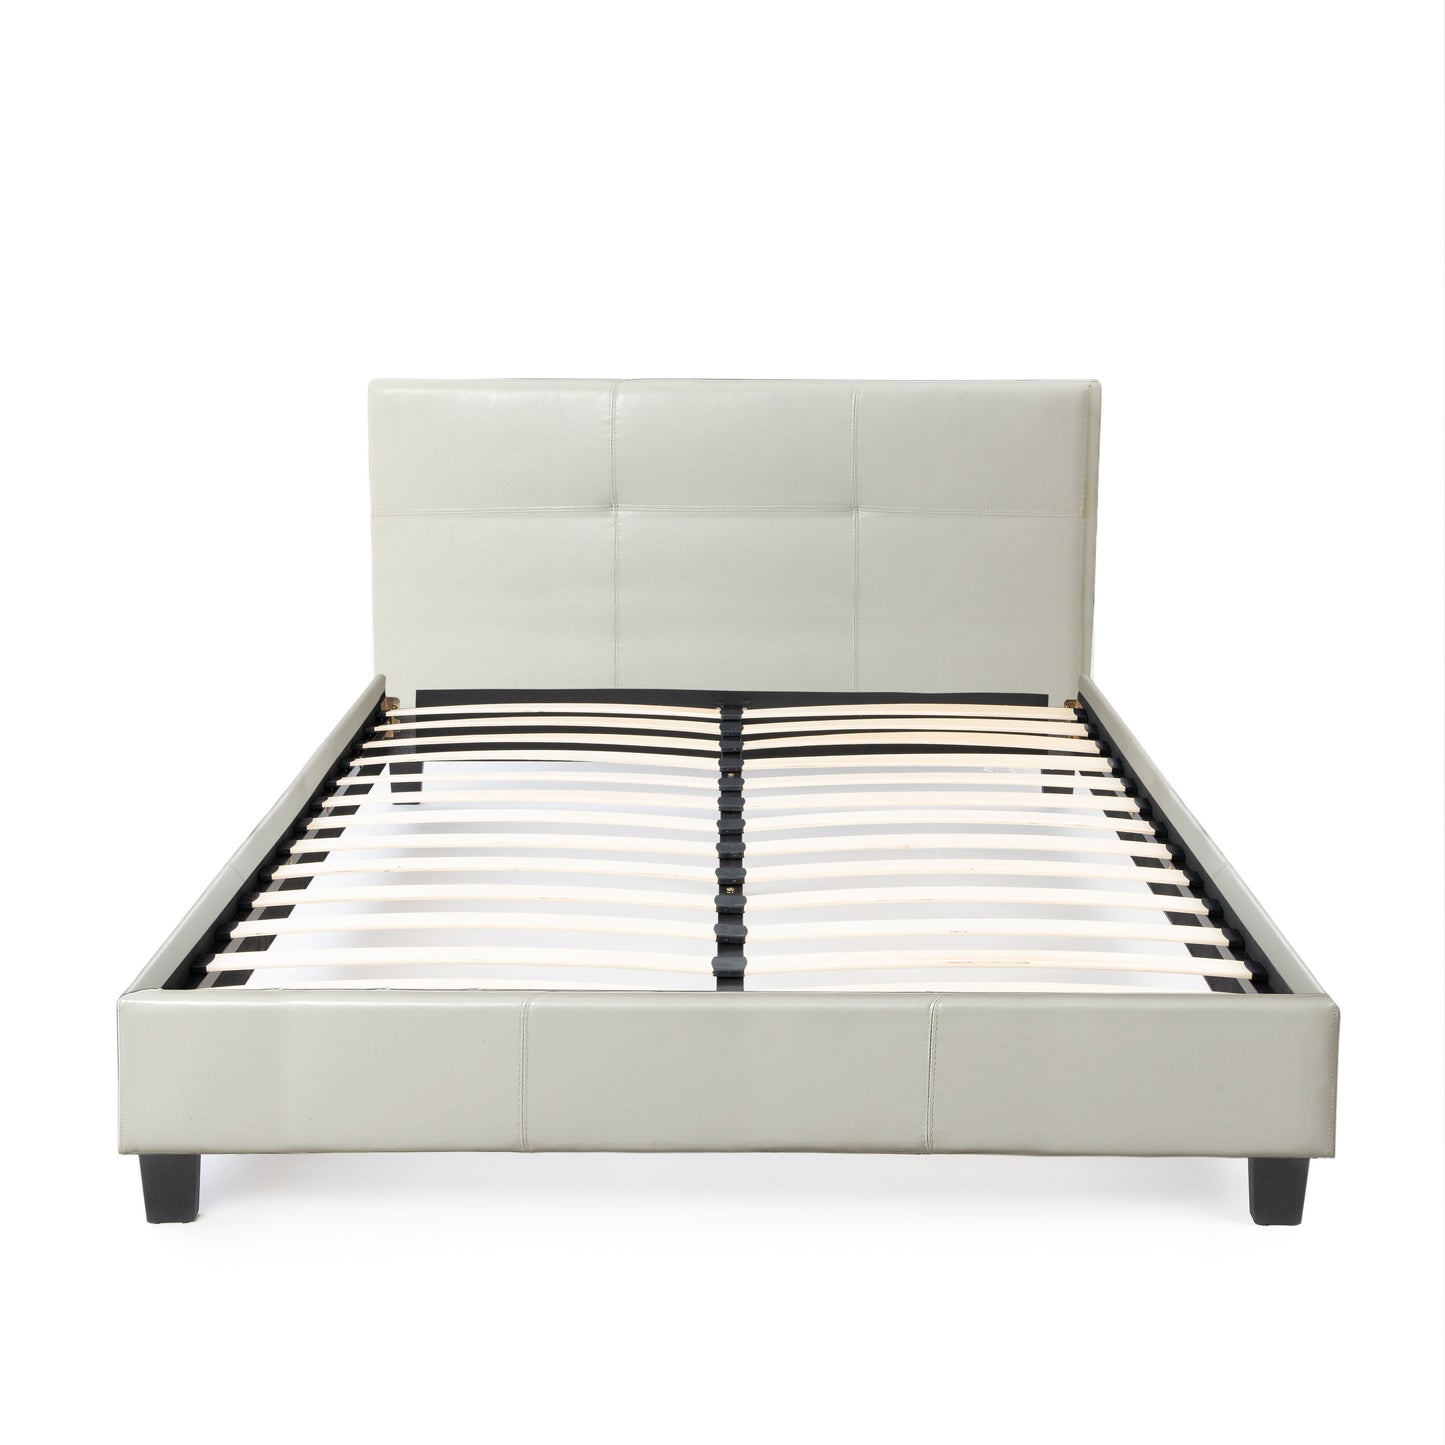 California Upholstered Bed Frame with Headboard